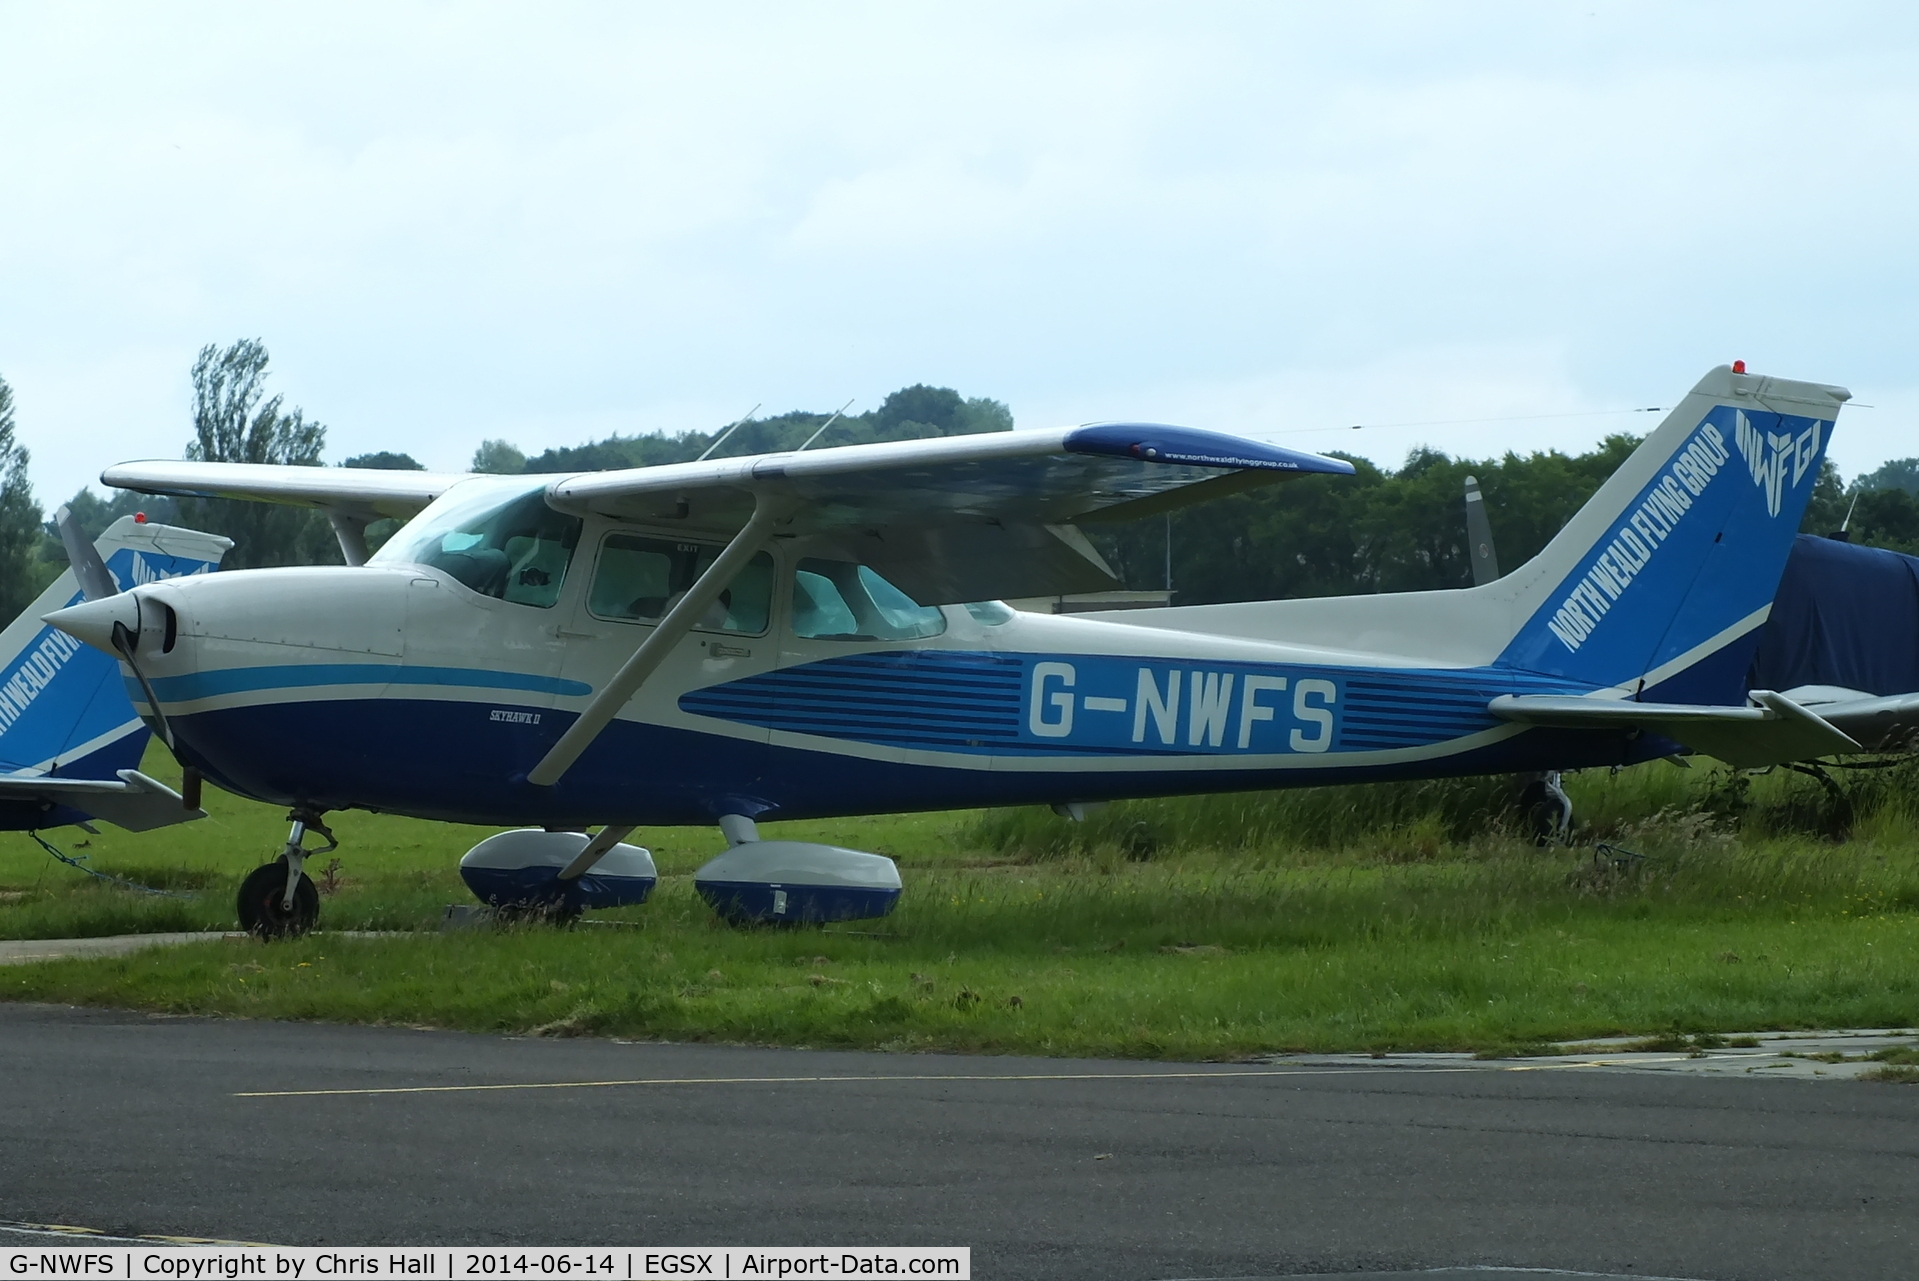 G-NWFS, 1983 Cessna 172P C/N 172-75815, North Weald Flying Group